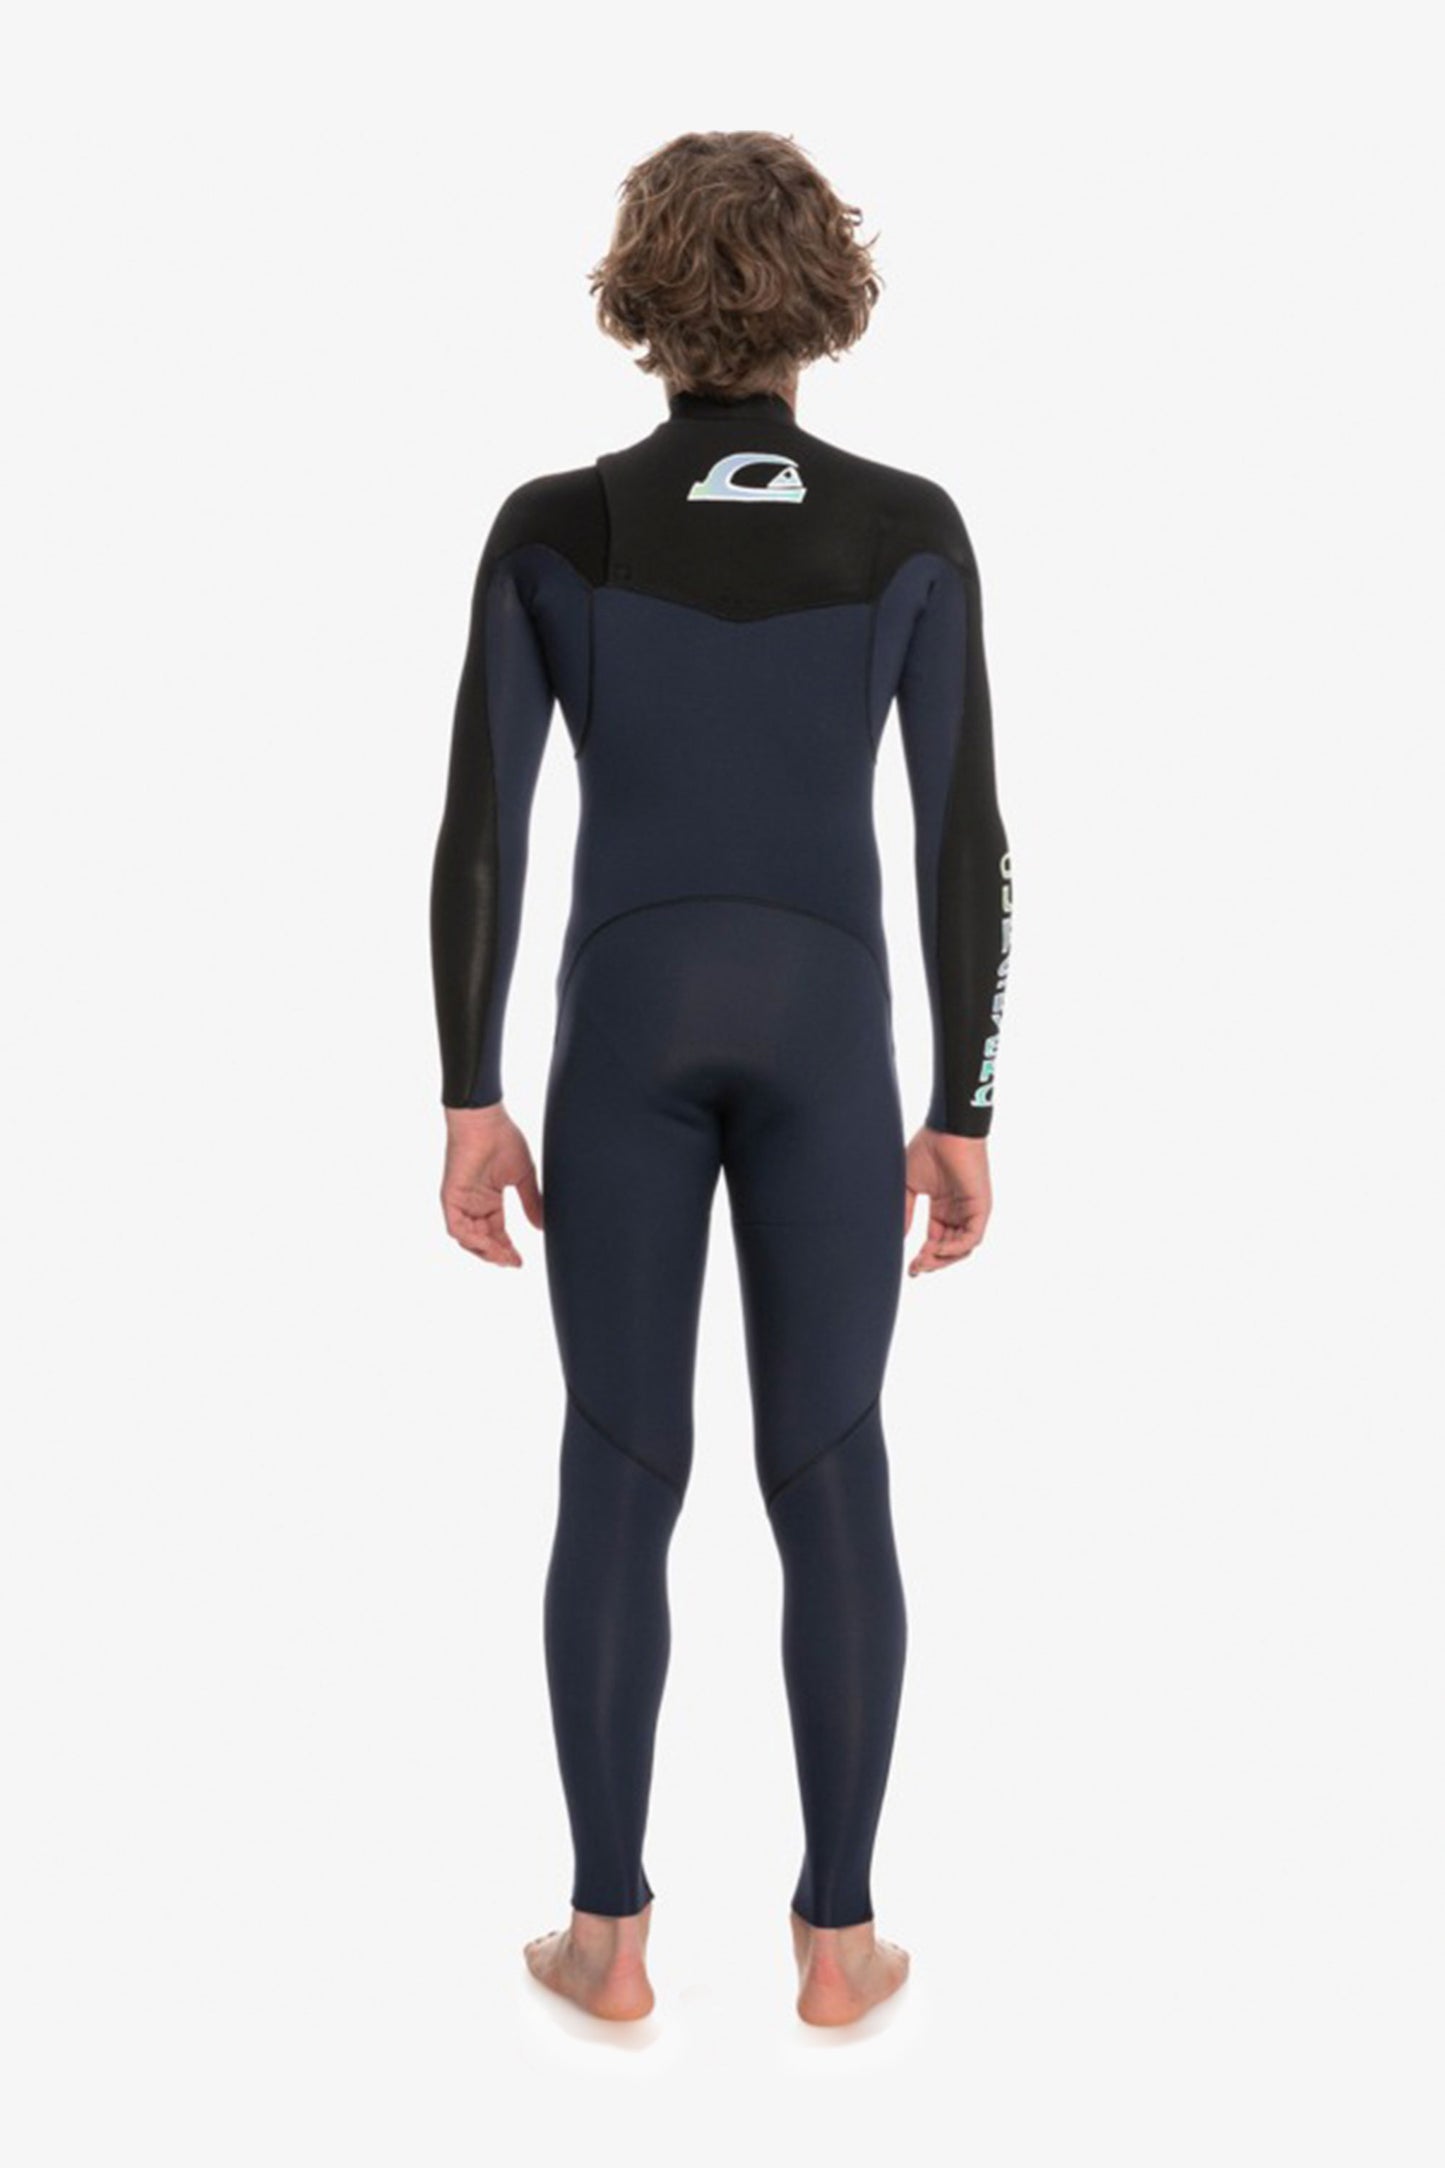    Pukas-Surf-Shop-Wetsuit-every-day-sessions-3-2mm-chest-zip-black-dark-navy